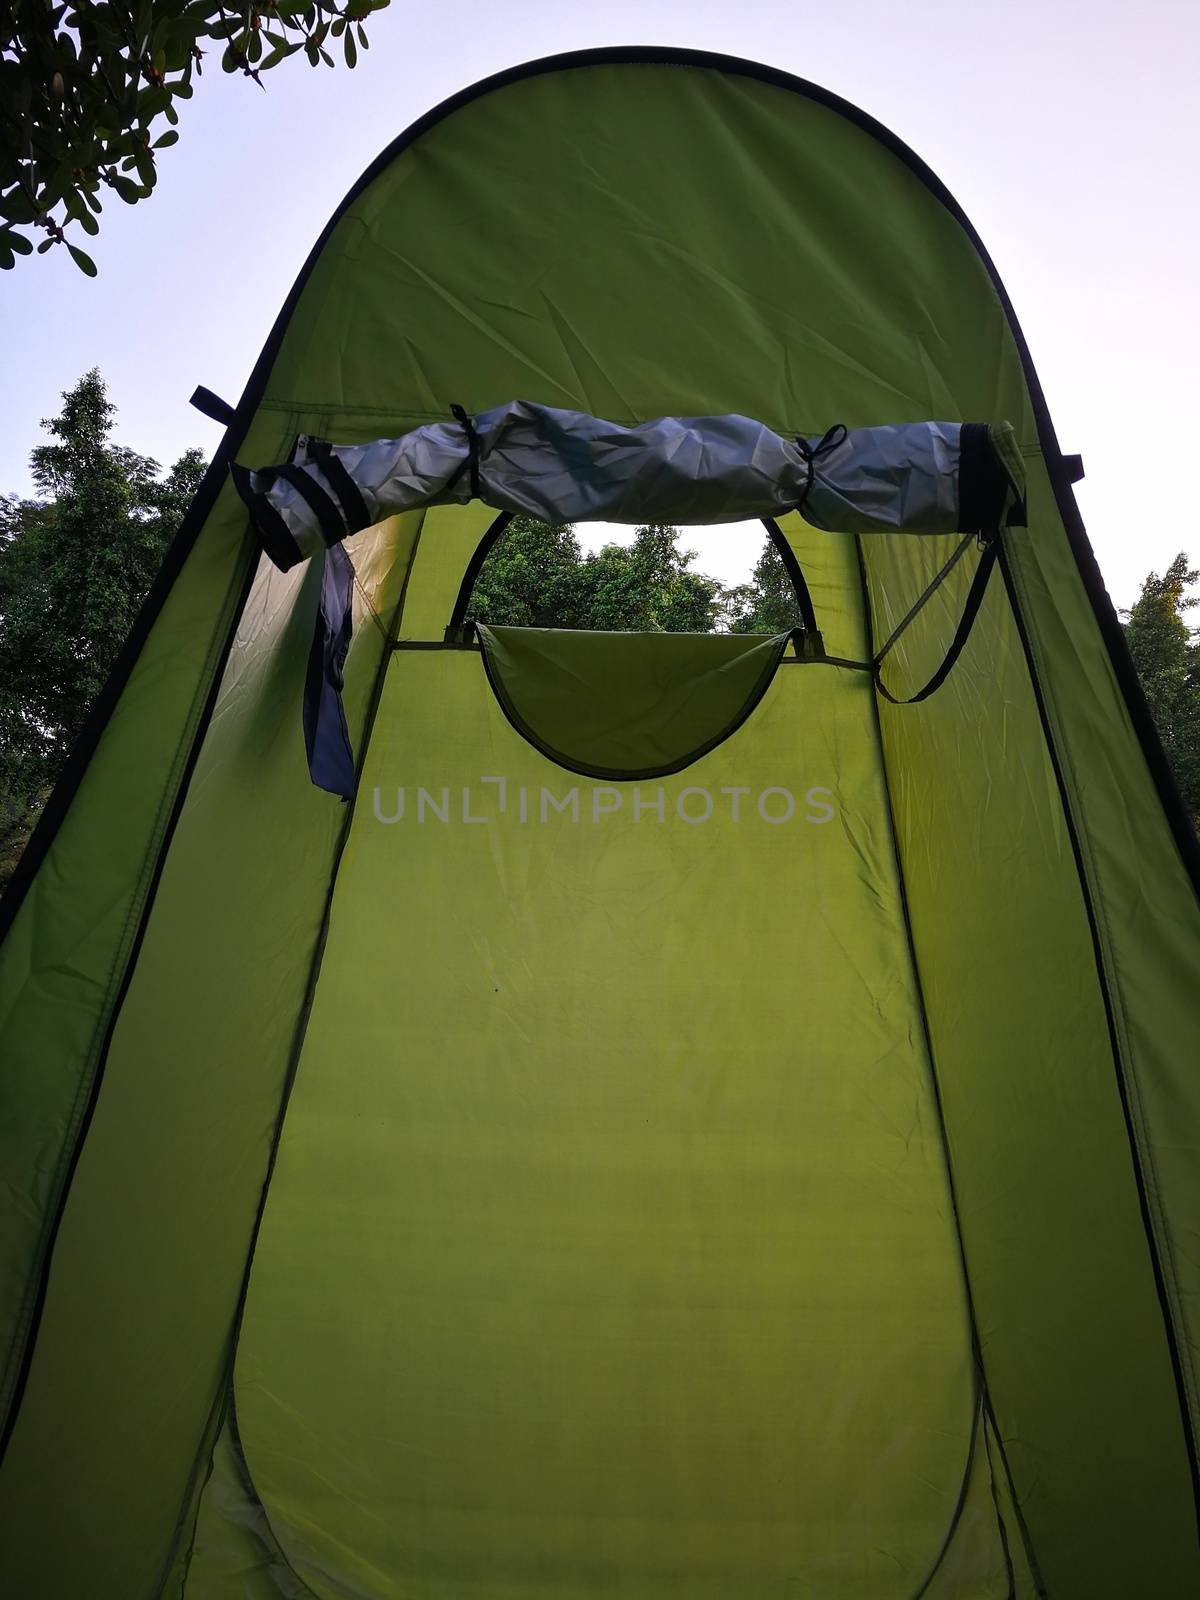 bathroom tents for camper wear or change clothes outdoor by shatchaya